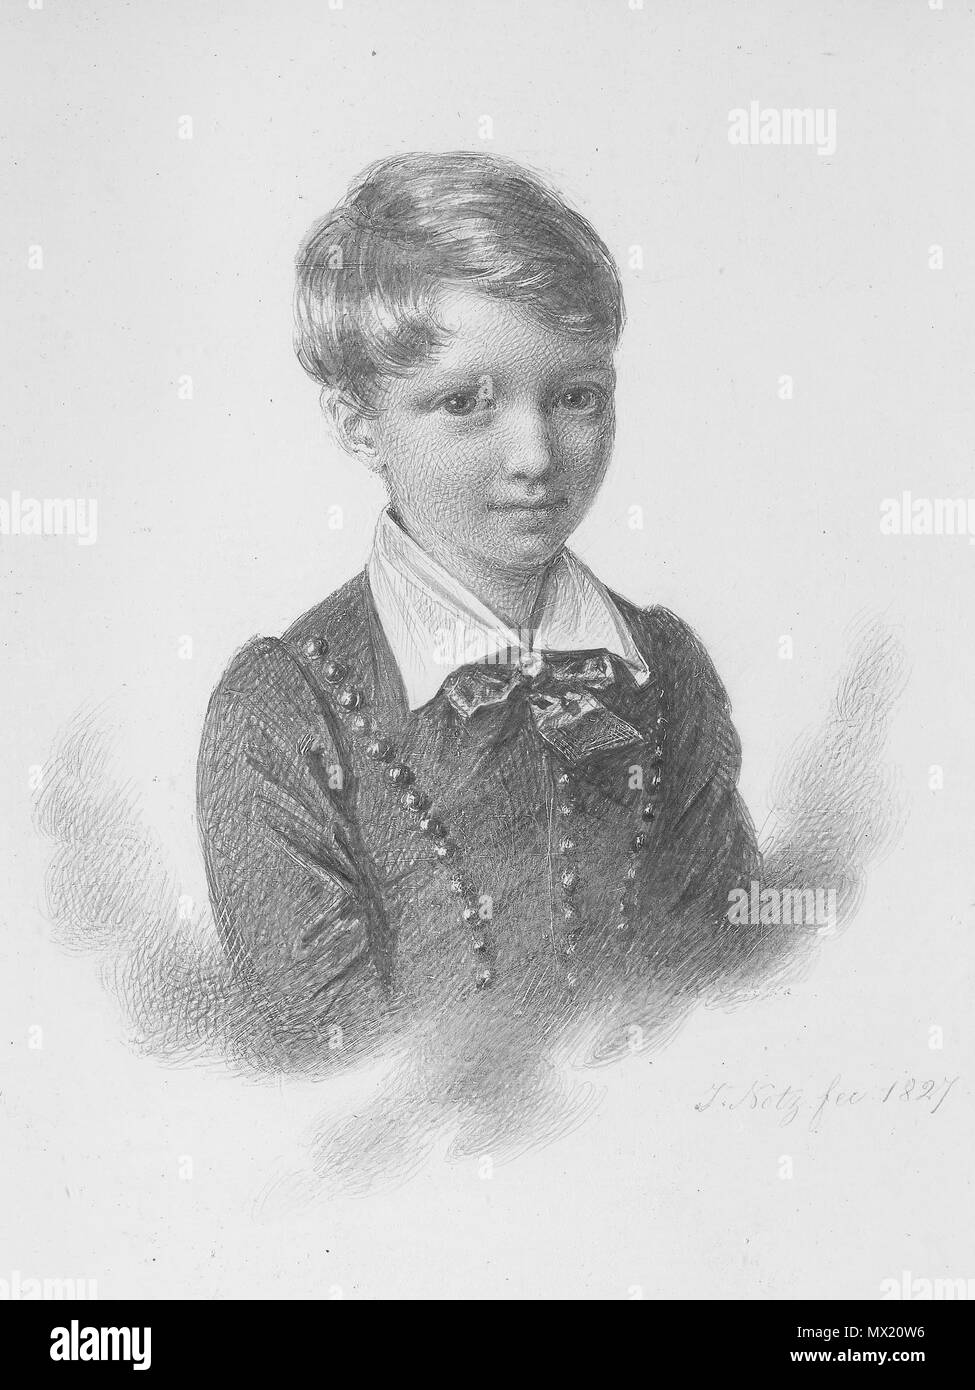 . English: Henry Danby Seymour MP (1820-1877) as a child Silverpoint 10.8 cm (image is cropped though) signed b.r.: J.Notz fec. 1827 inscribed verso: Henry Danby Seymour/ born 1820 D.1877/ Hen.  . 1827. Johannes Notz (1802-1862) 274 Henry Danby Seymour MP (1820-1877) as a child, by Johannes Notz (1802-1862) Stock Photo